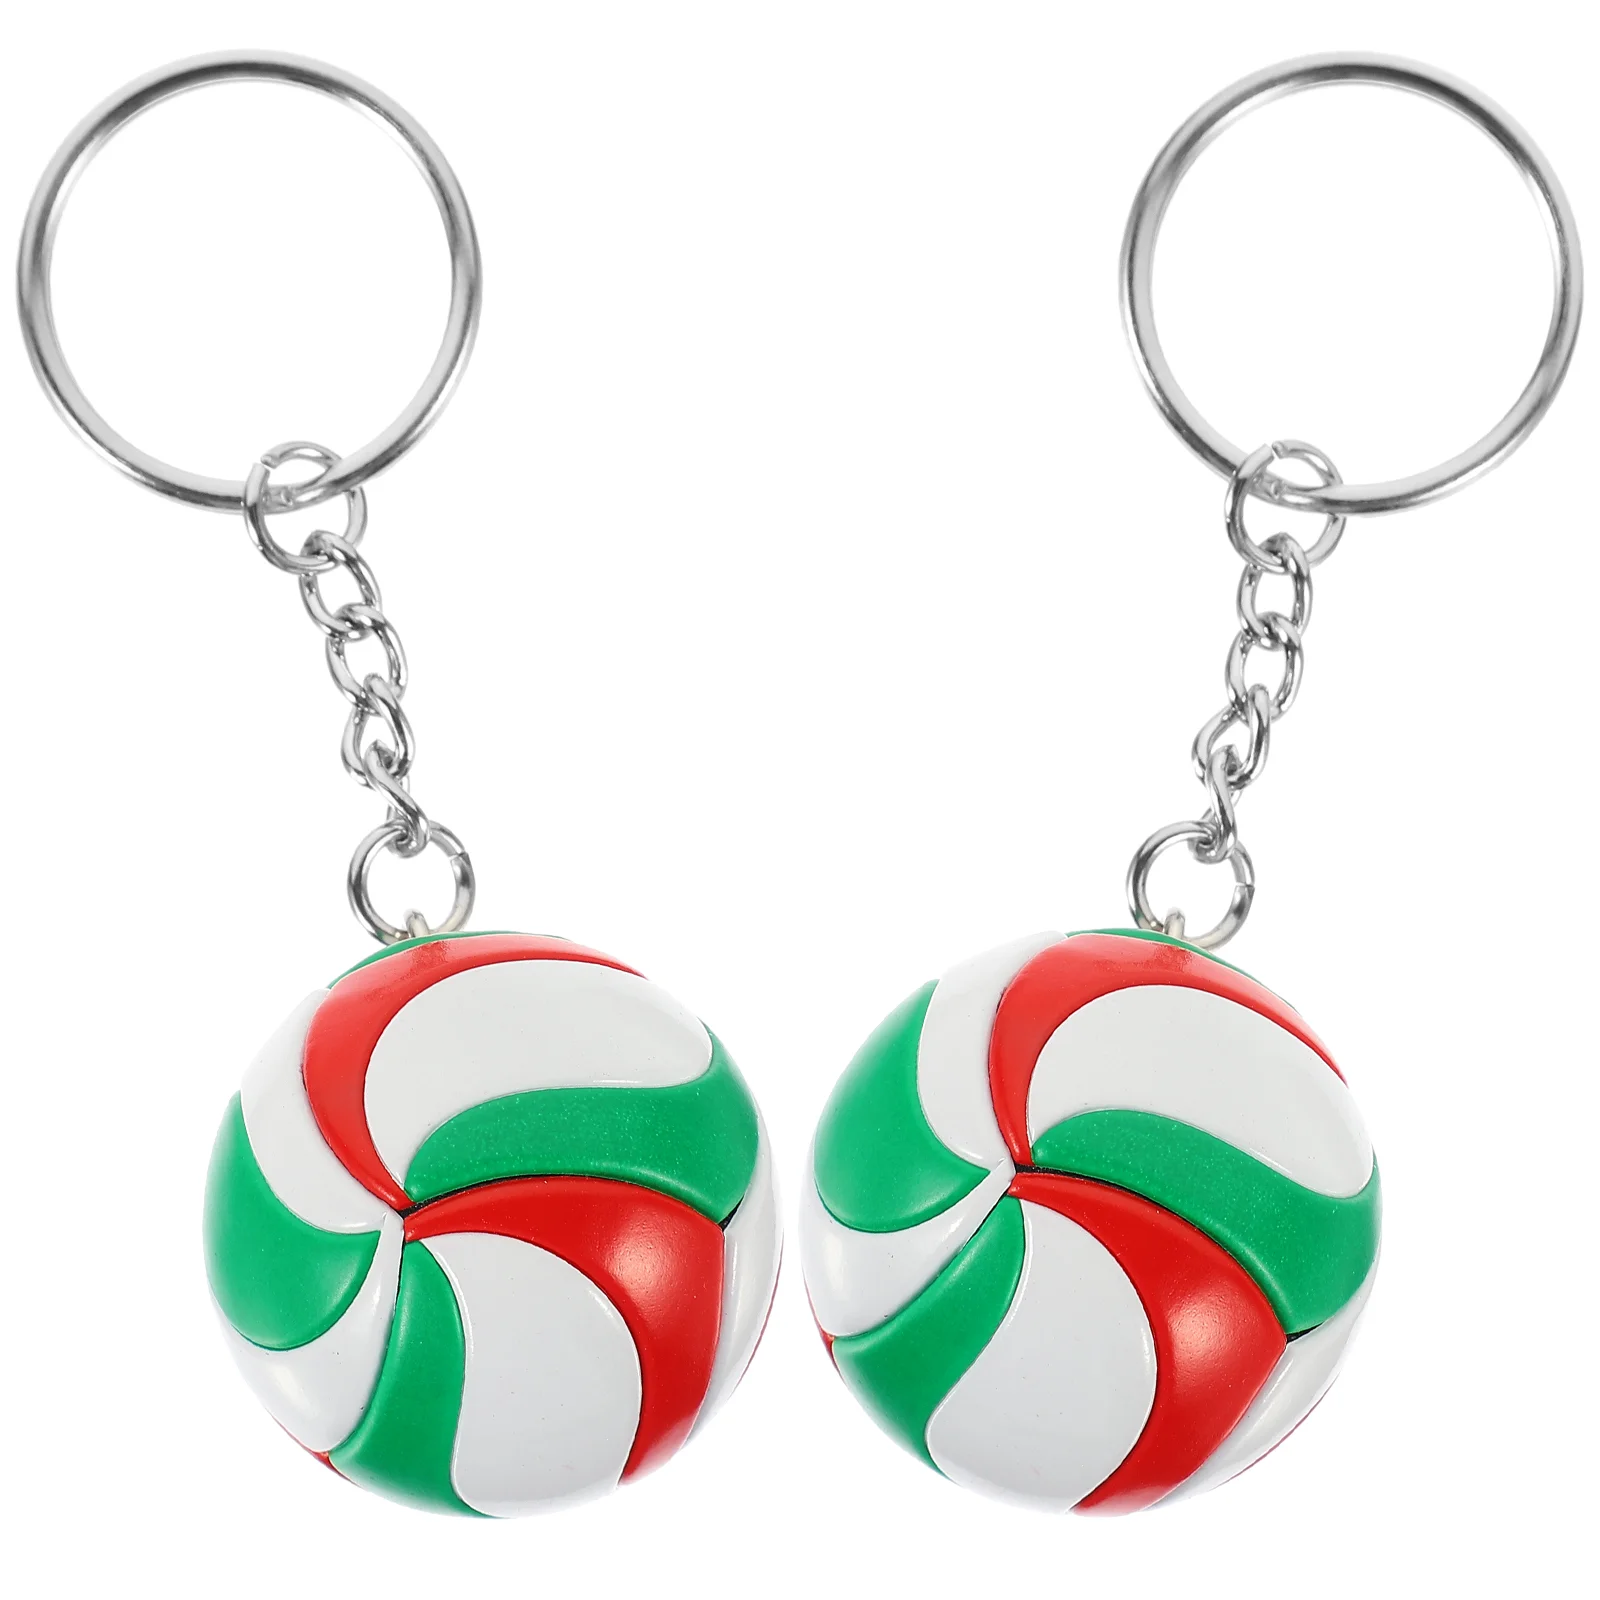 

2 Pcs Volleyball Model Toy Keychain Hanging Adorable Children Bag Pendant Decor Keychains Team Compact Multi-function